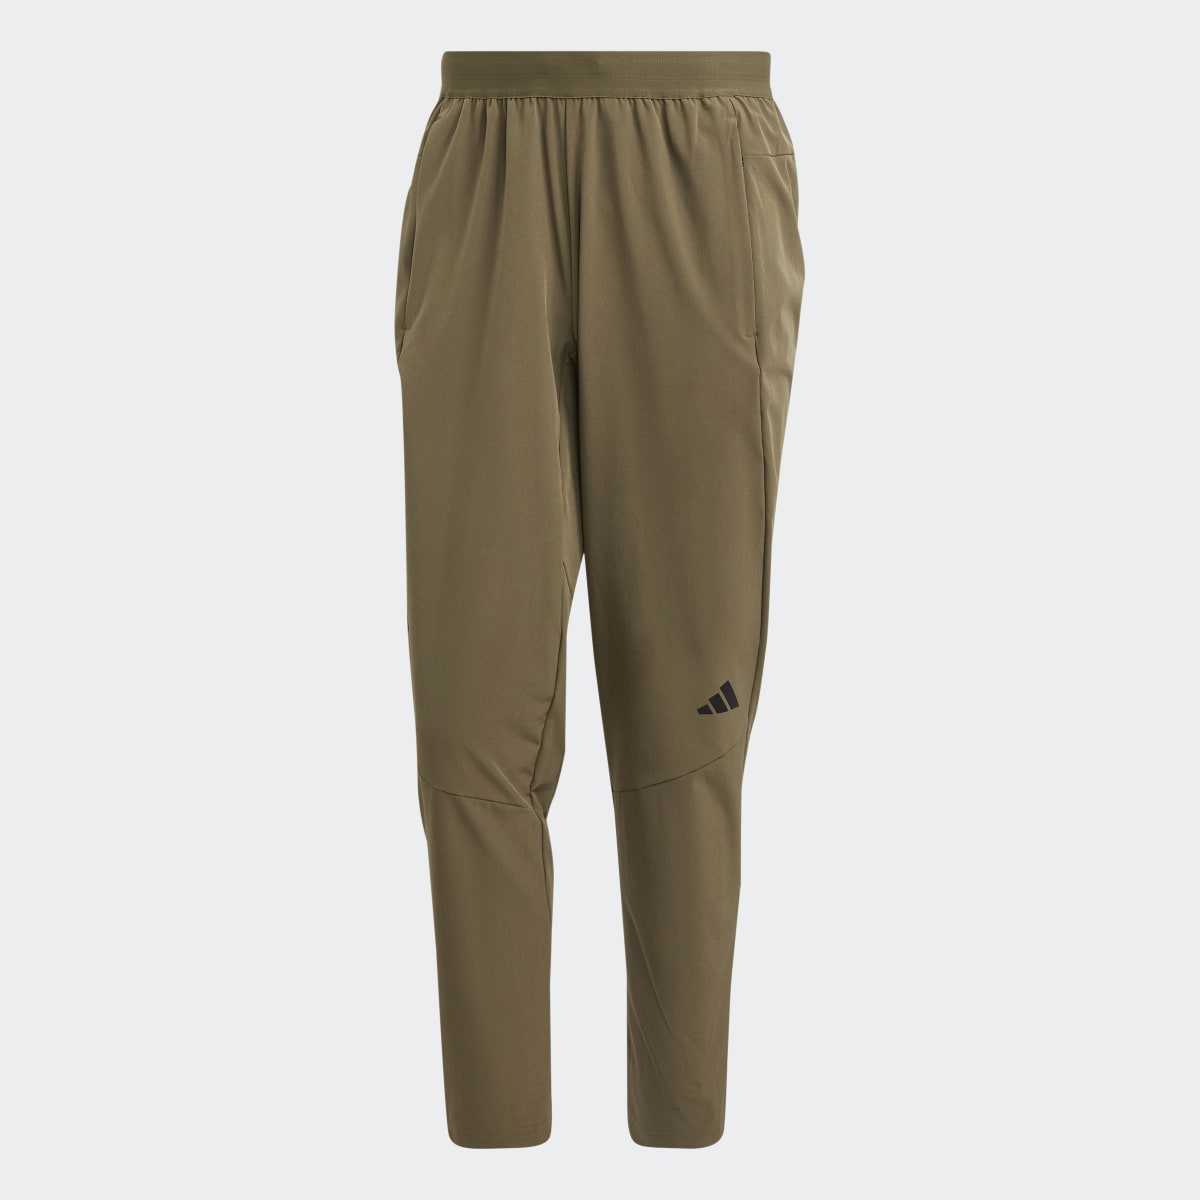 Adidas HIIT Pants Curated By Cody Rigsby. 4